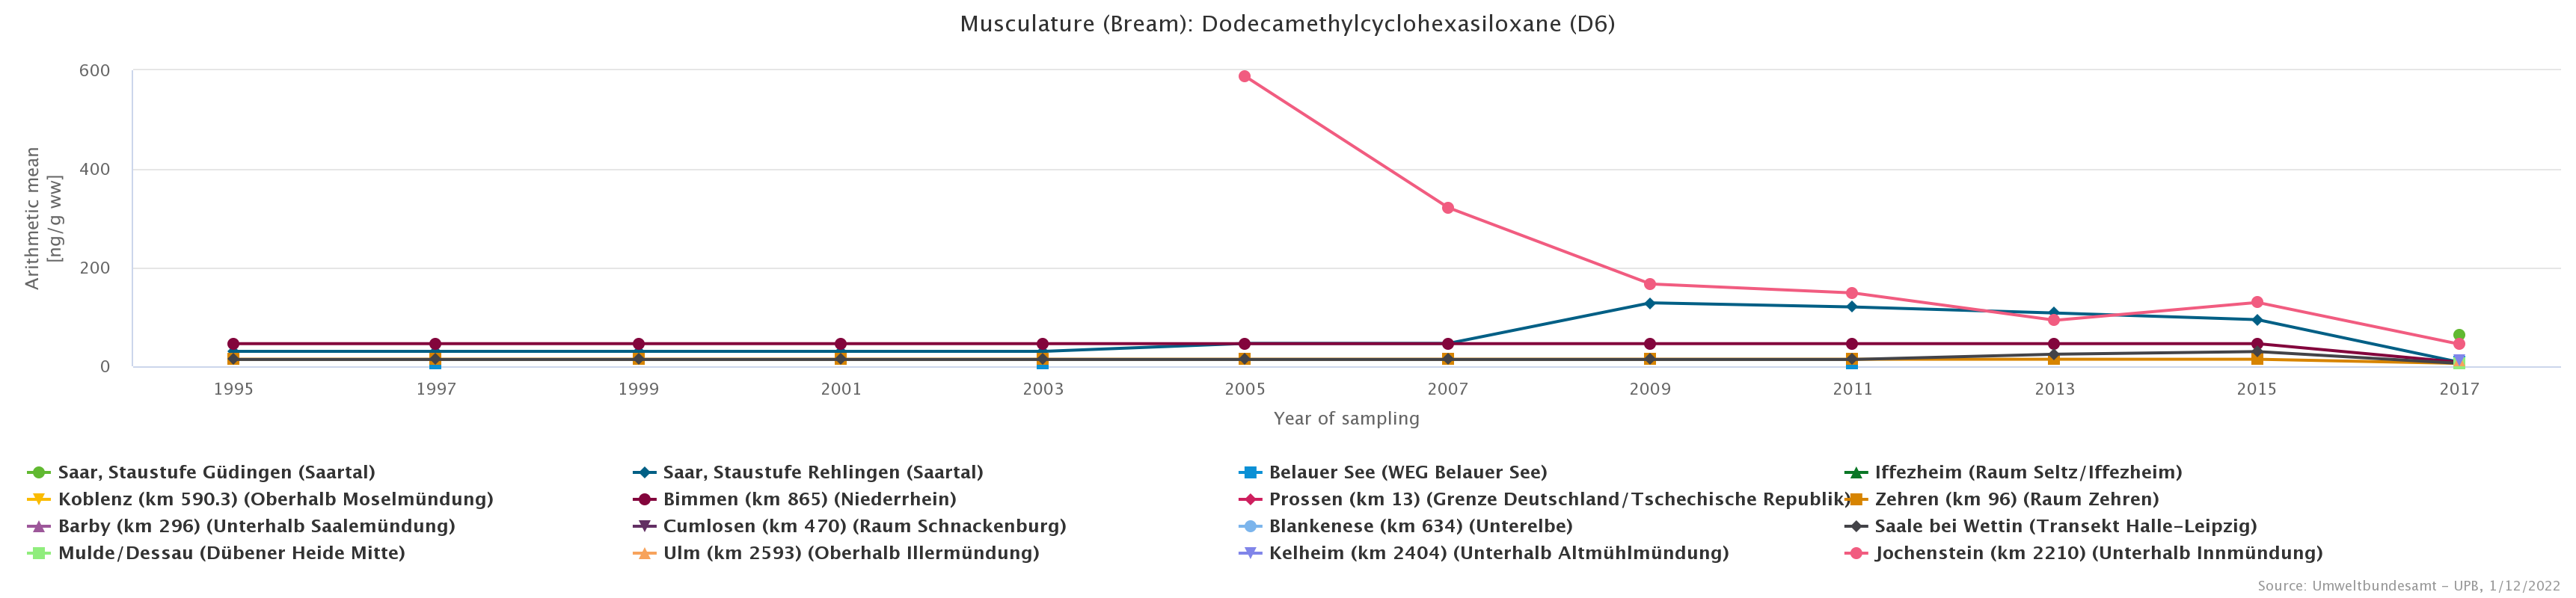 Especially noticeable high concentration of dodecamethylcyclohexasiloxane in 2009 at the Danube sampling site Jochenstein.